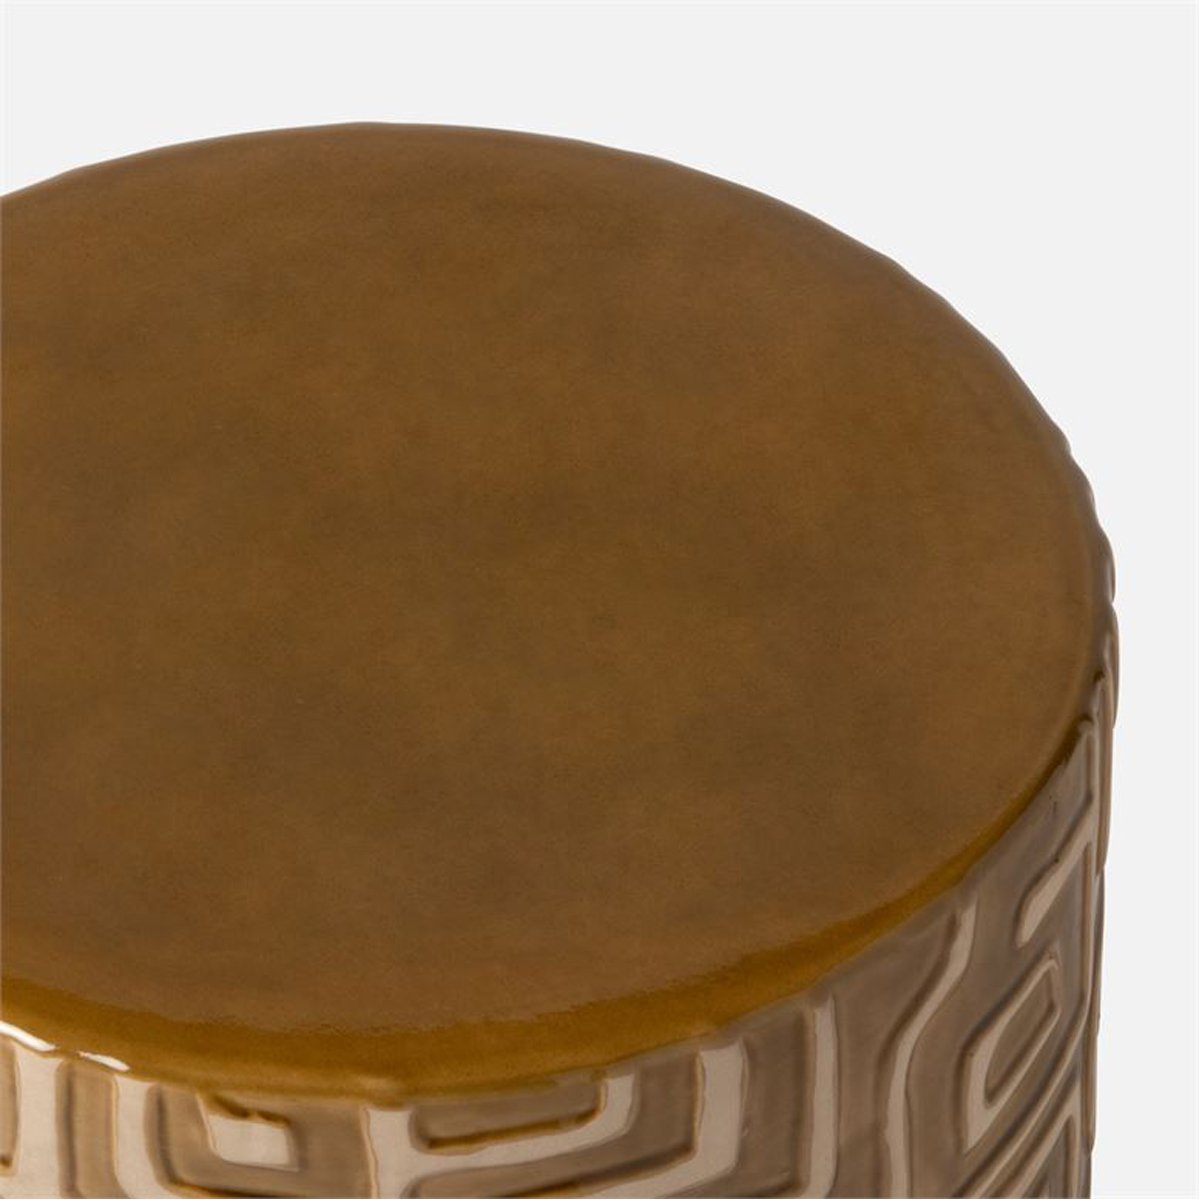 Made Goods Loman Graphic Patterned Ceramic Outdoor Stool